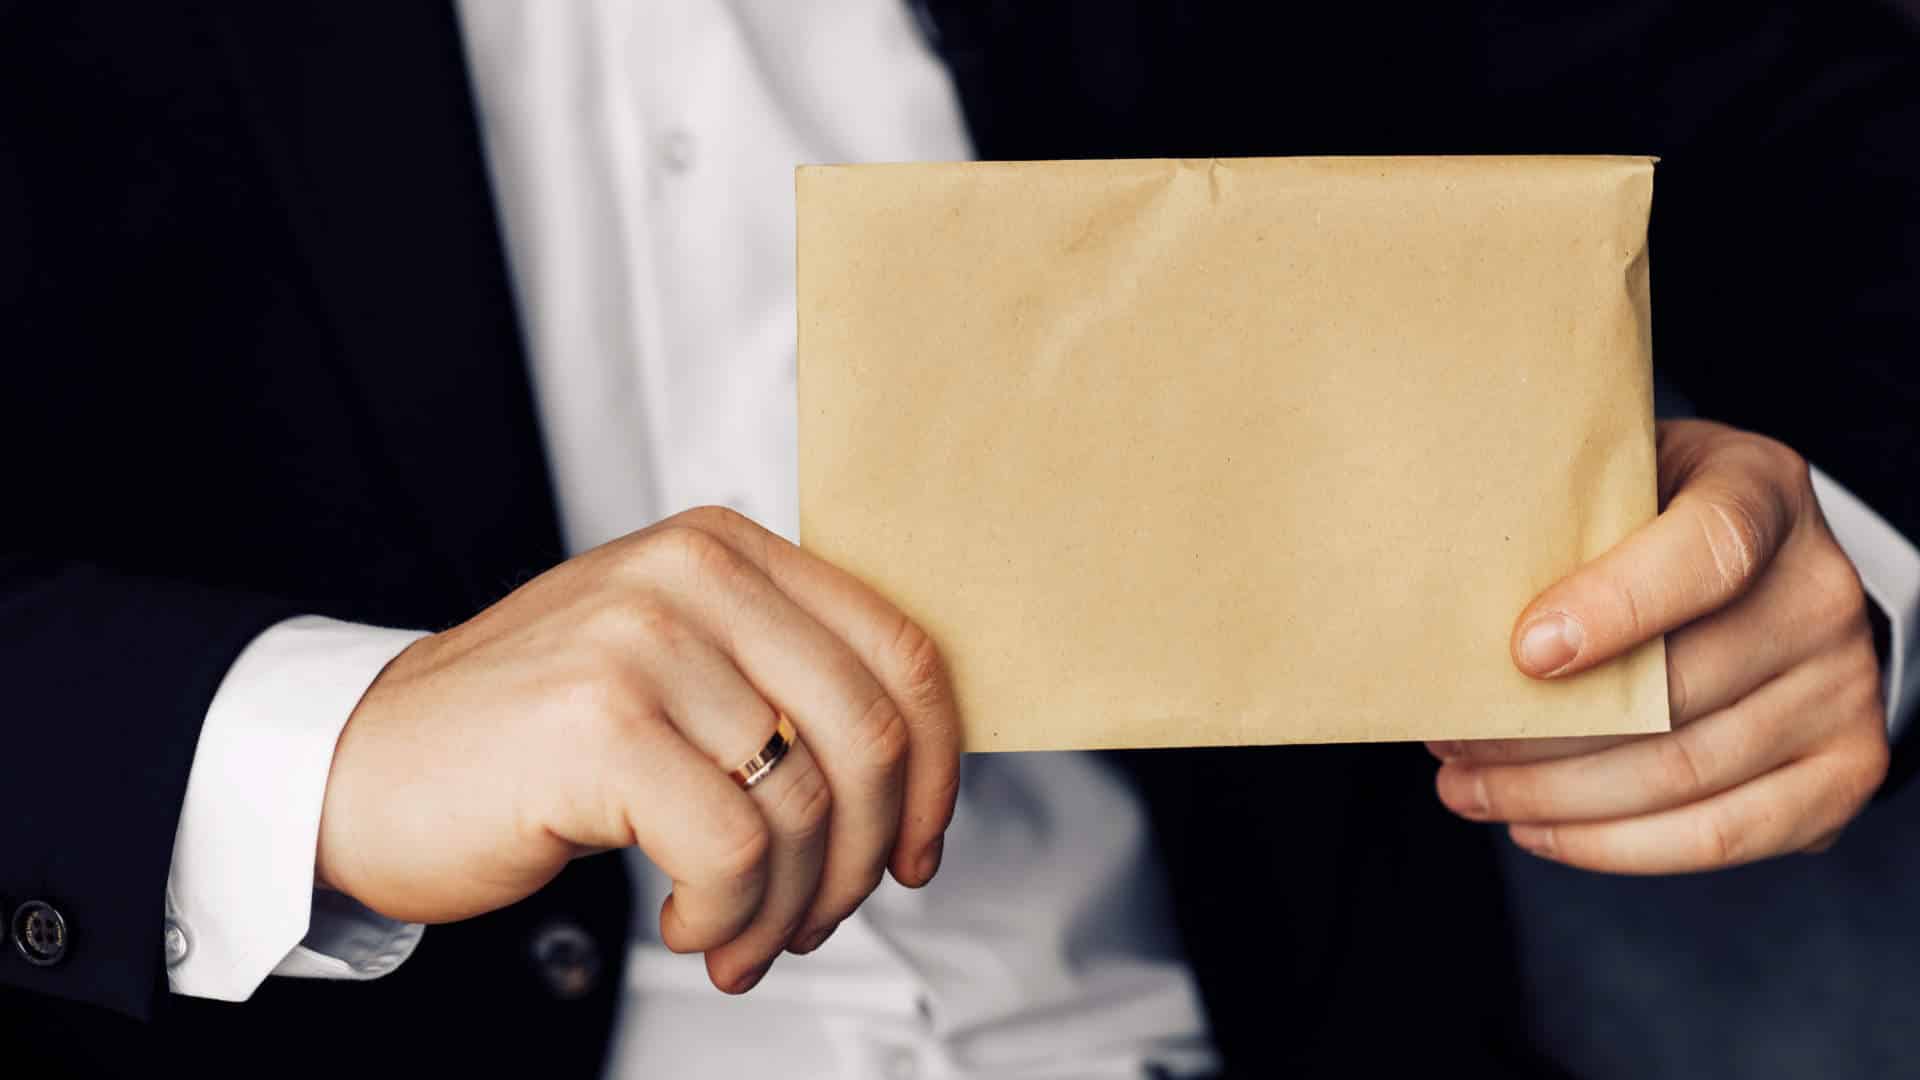 How to write a letter to your partner on your wedding day from a videographer's point of view